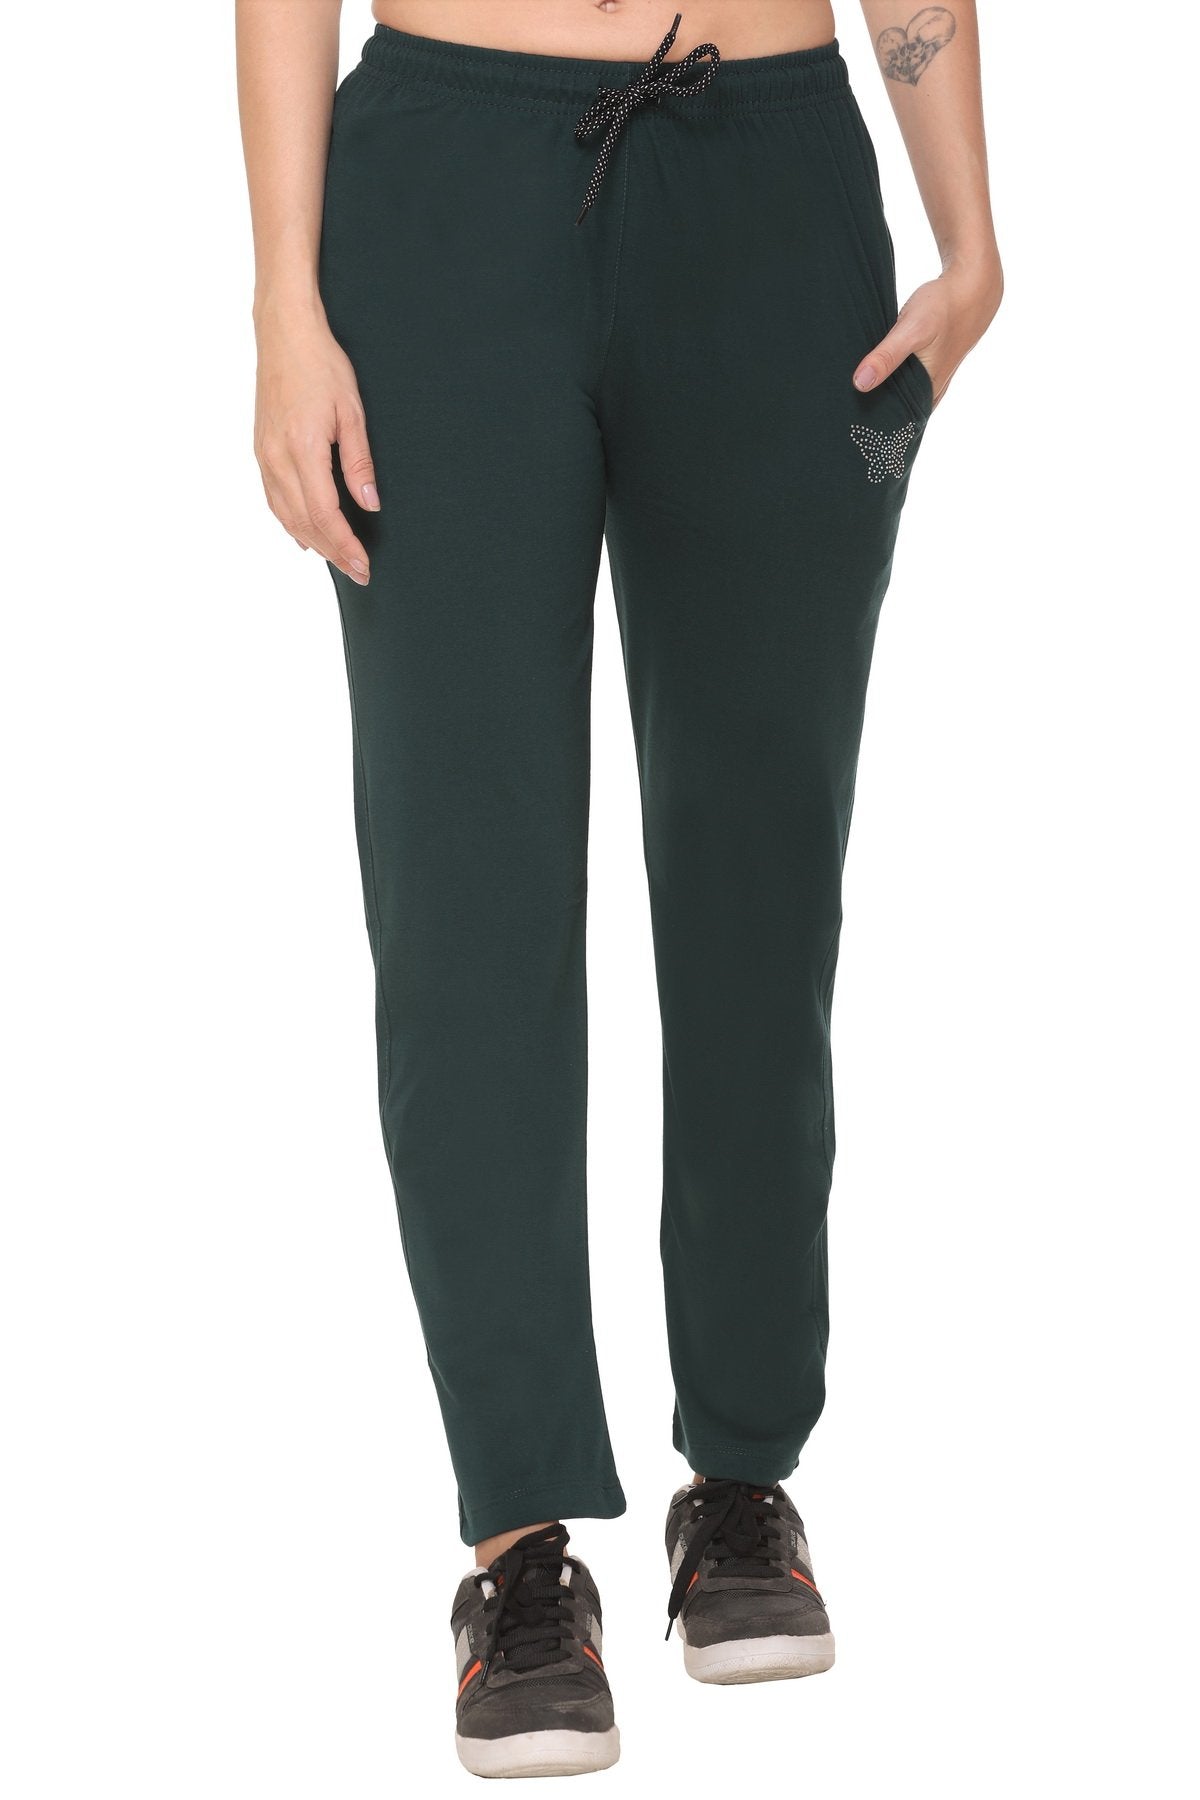 Solid Women Grey, Black Track Pants Price in India - Buy Solid Women Grey,  Black Track Pants online at Shopsy.in